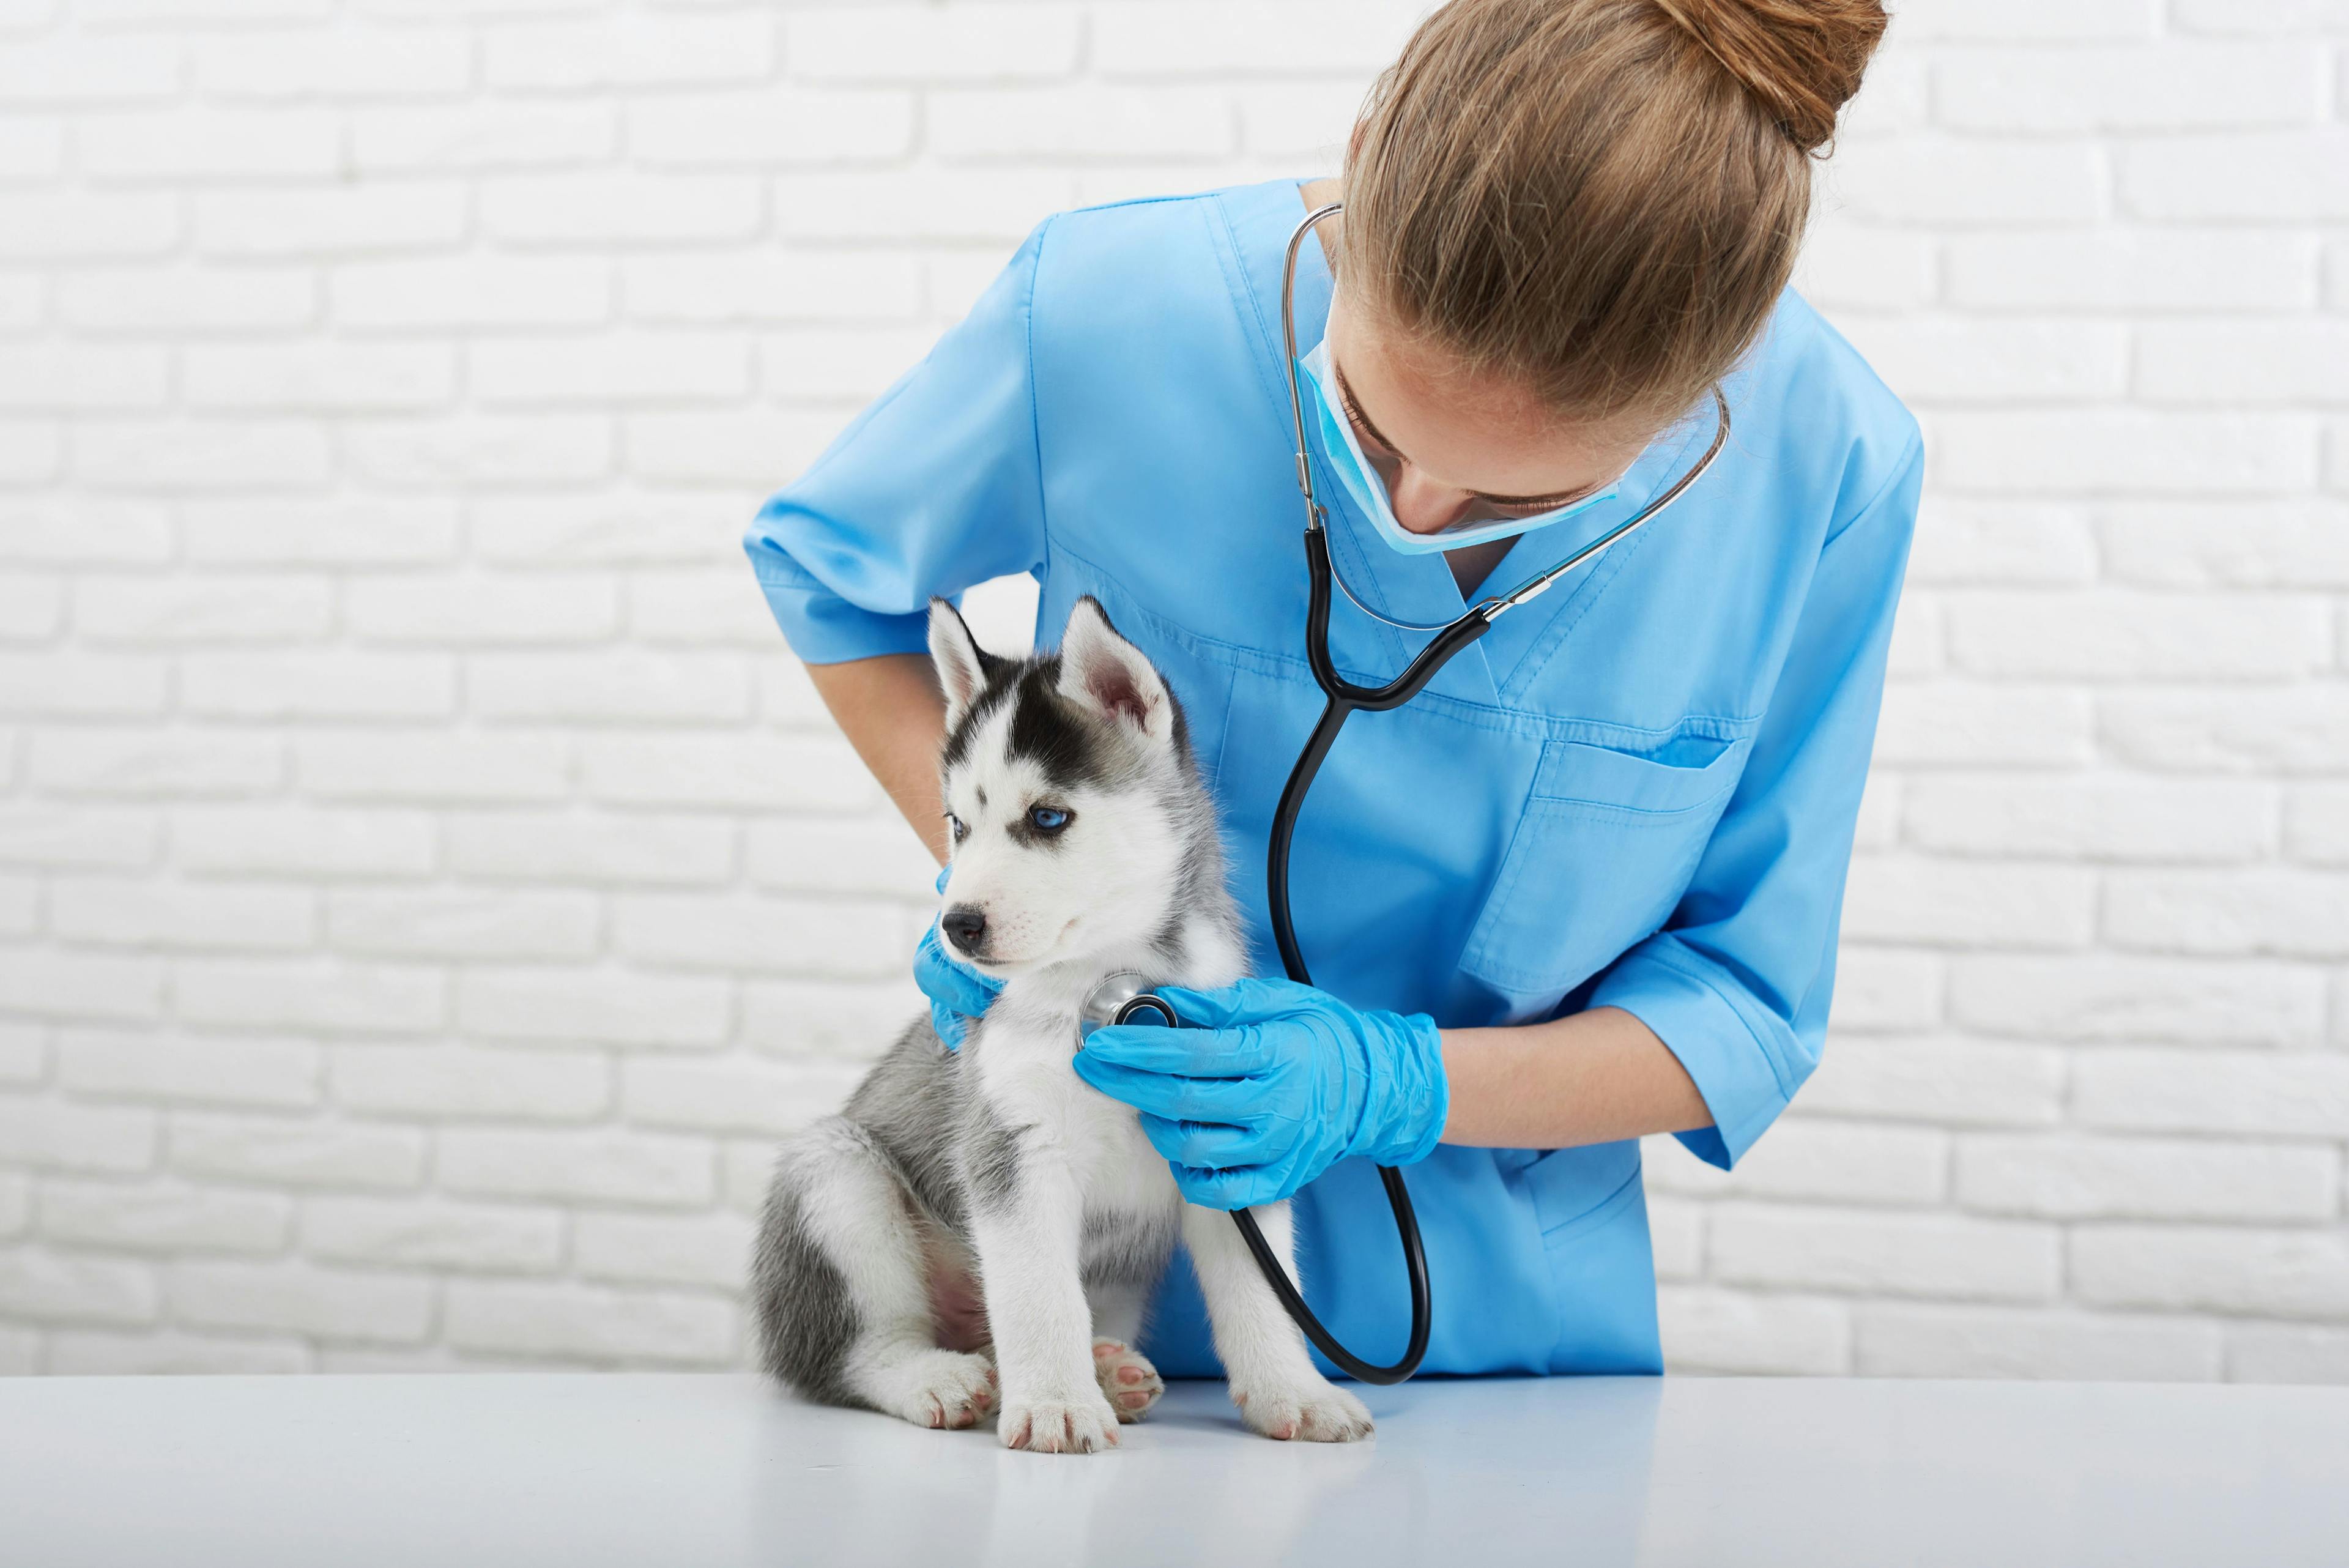 Do we need a paradigm shift in canine neutering?